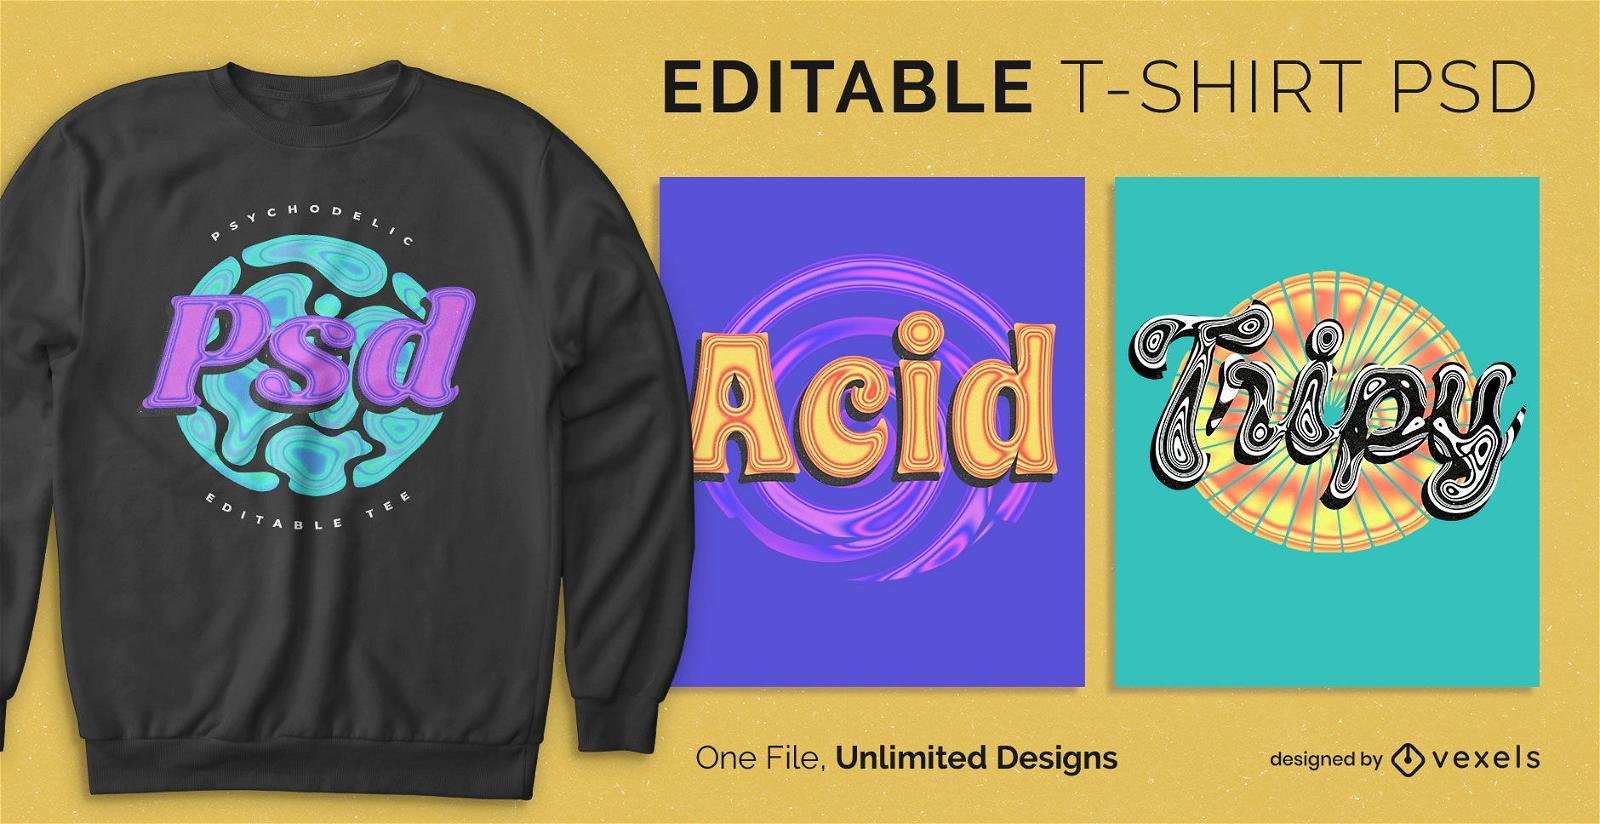 Psychedelic scalable t-shirt psd